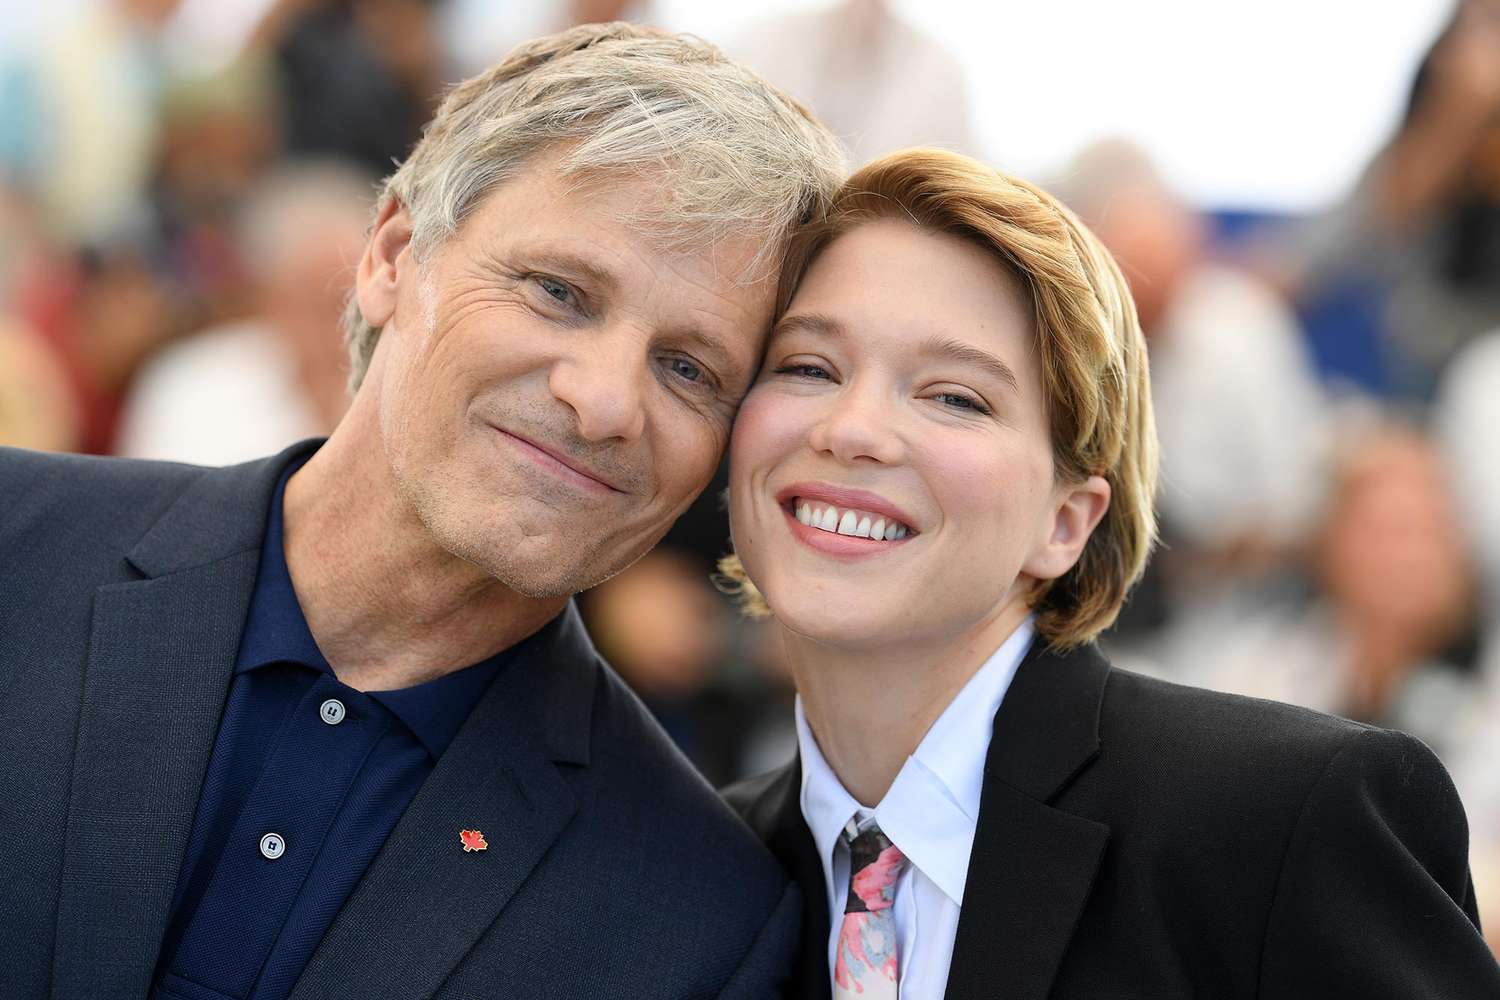 Cannes Film Festival 2022 Léa Seydoux and Viggo Mortensen attend the photocall for "Crimes Of The Future" during the 75th annual Cannes film festival at Palais des Festivals on May 24, 2022 in Cannes, France.